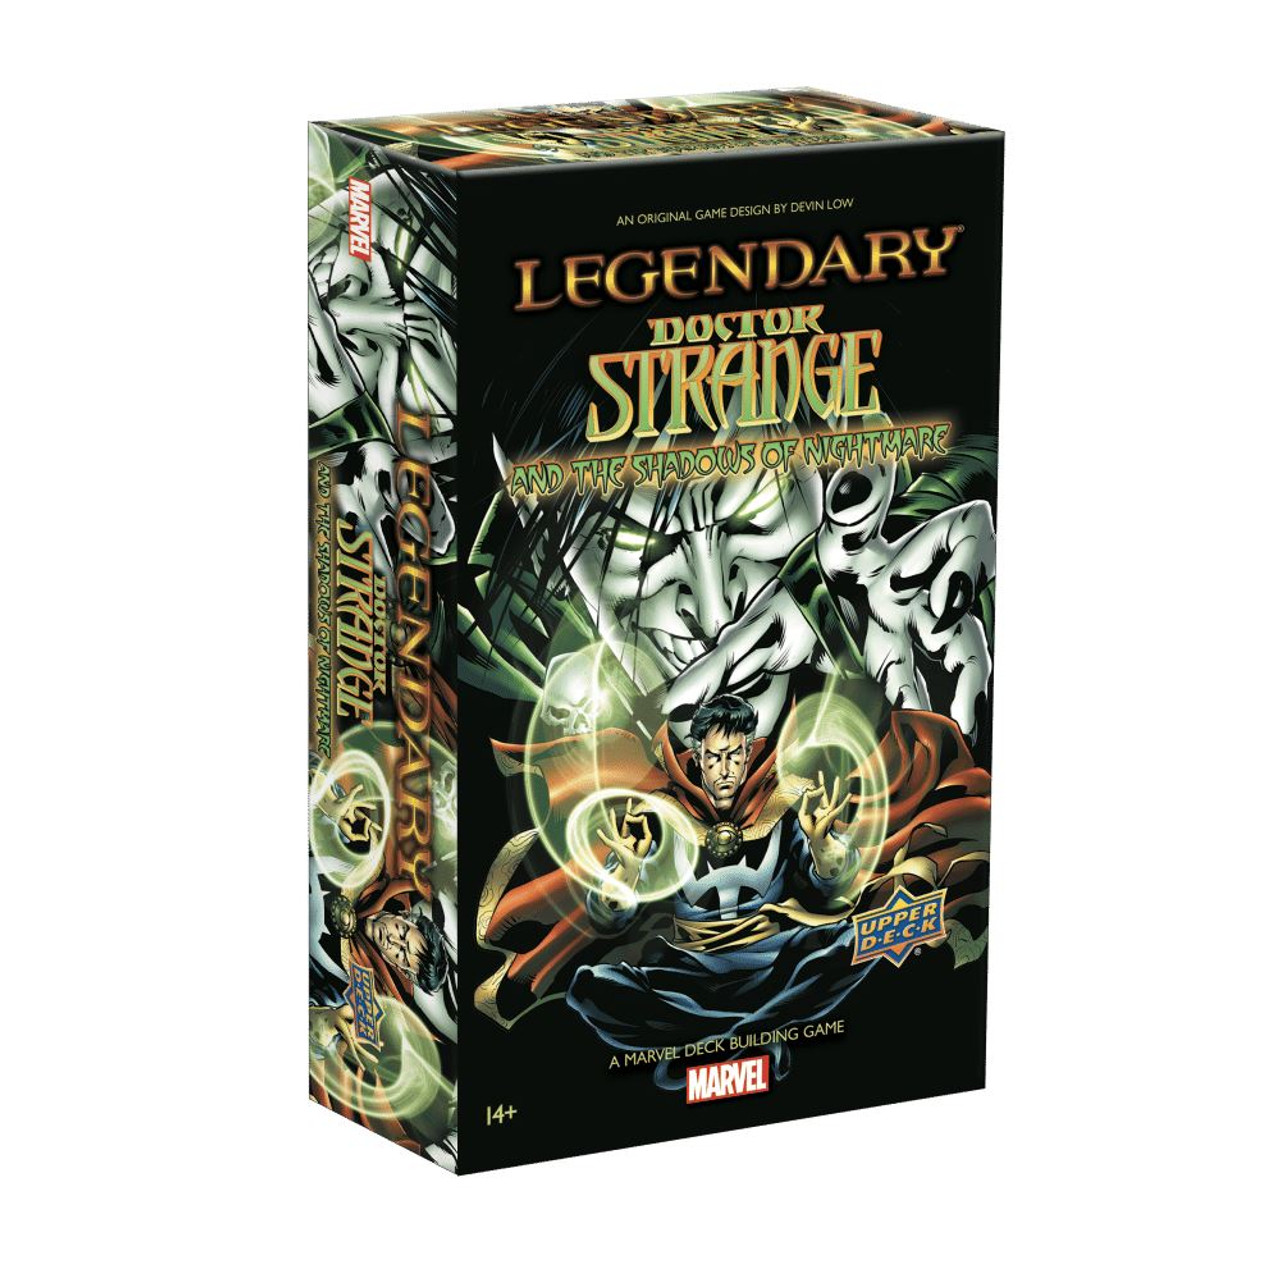 Legendary Marvel: Doctor Strange and the Shadows of Nightmare Expansion Card Game